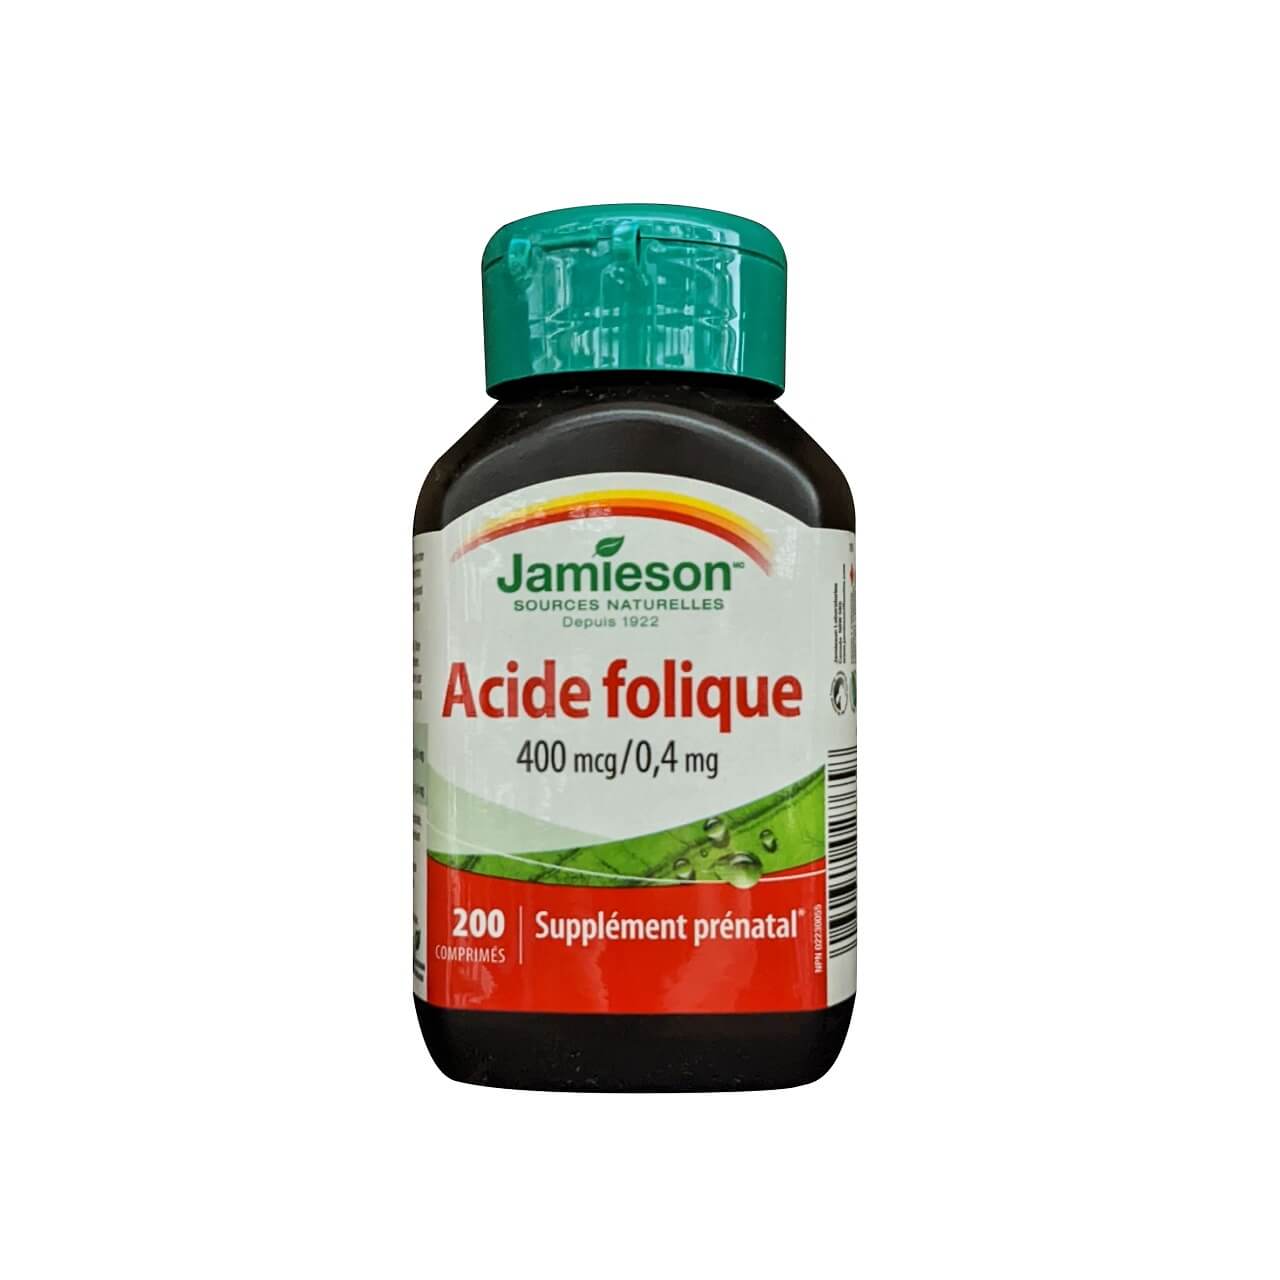 Product label for Jamieson Folic Acid 400 mcg (200 tablets) in French